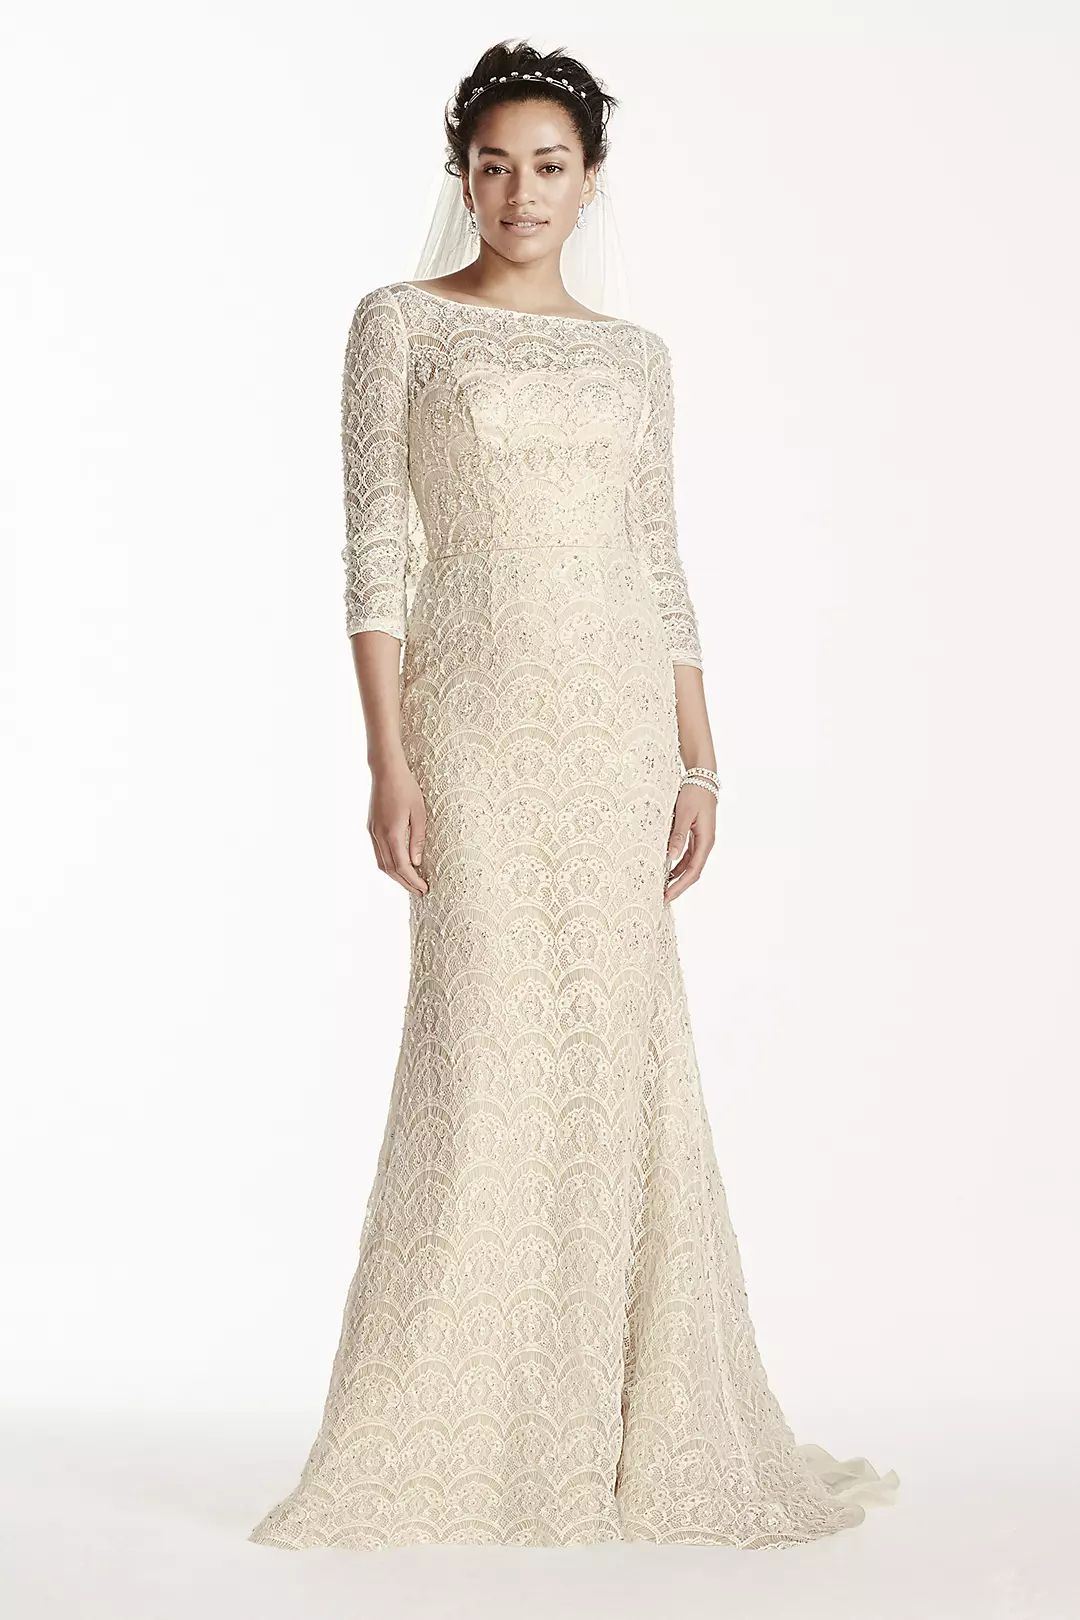 As - Is Beaded Lace 3/4 Sleeved Wedding Dress Image